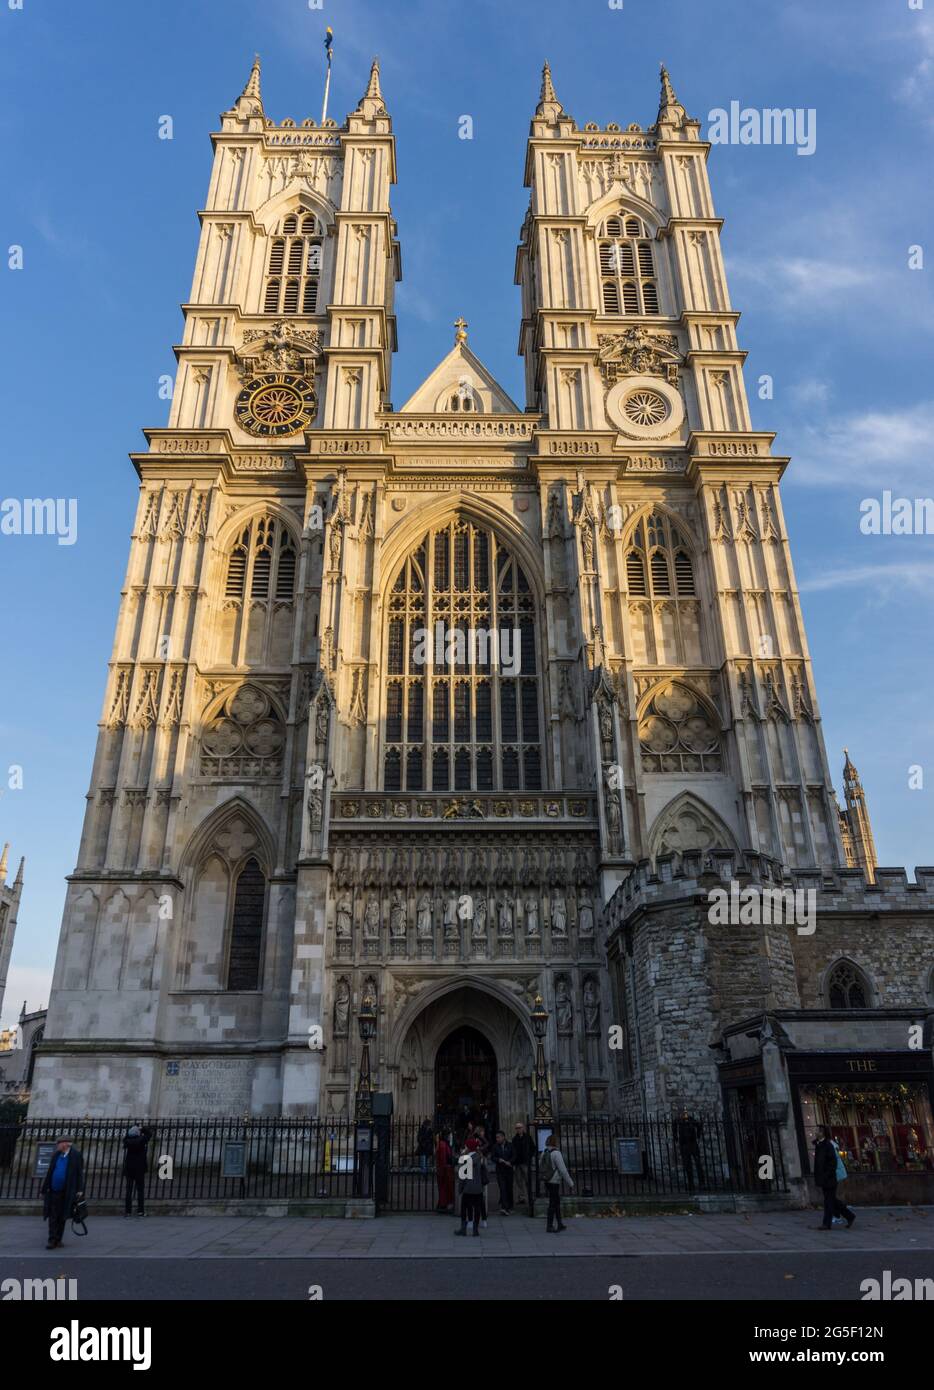 The main entrance of Westminster Abbey, cathedral London, England Stock Photo